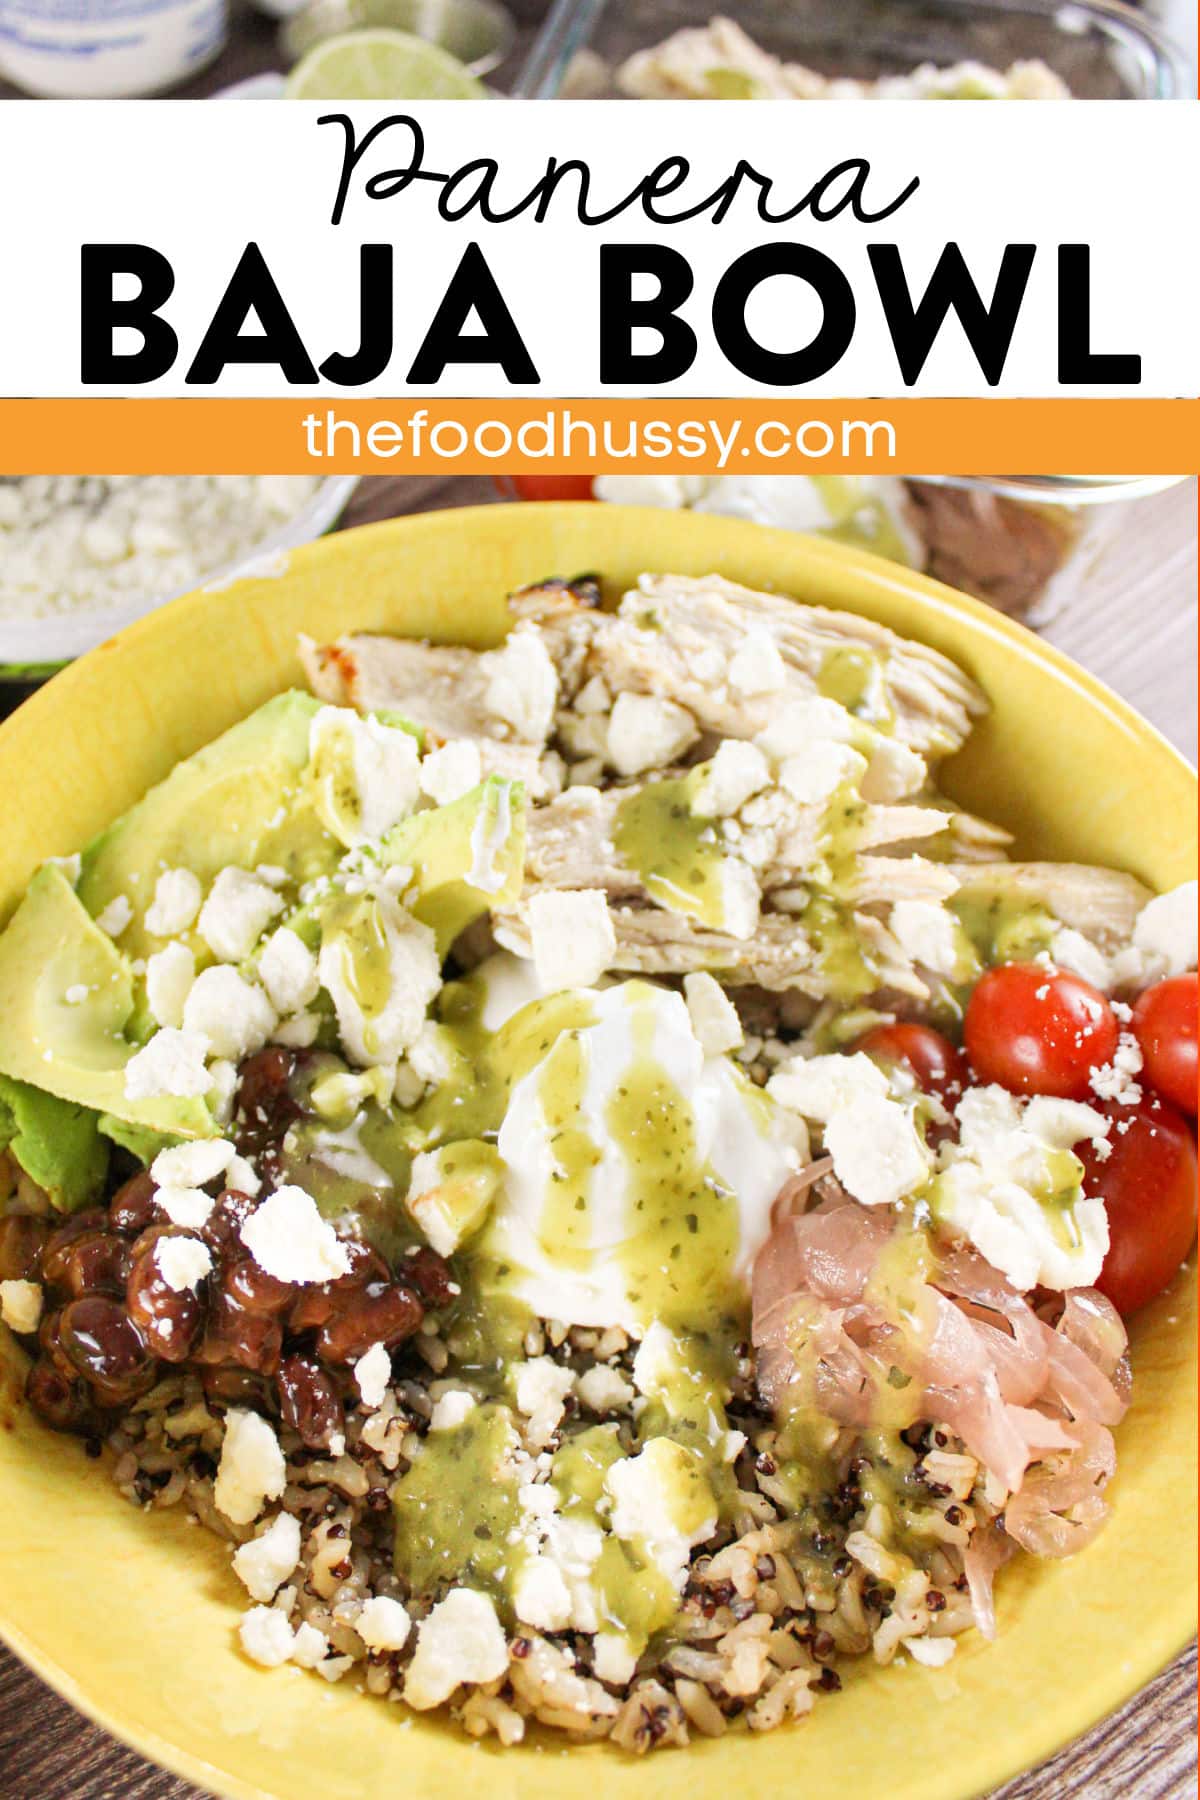 This copycat of the Panera Baja Warm Grain Bowl is packed with juicy, marinated chicken, brown rice, quinoa, avocado, tomatoes, feta and more! It’s great for any meal at home or make-ahead meal planning! via @foodhussy